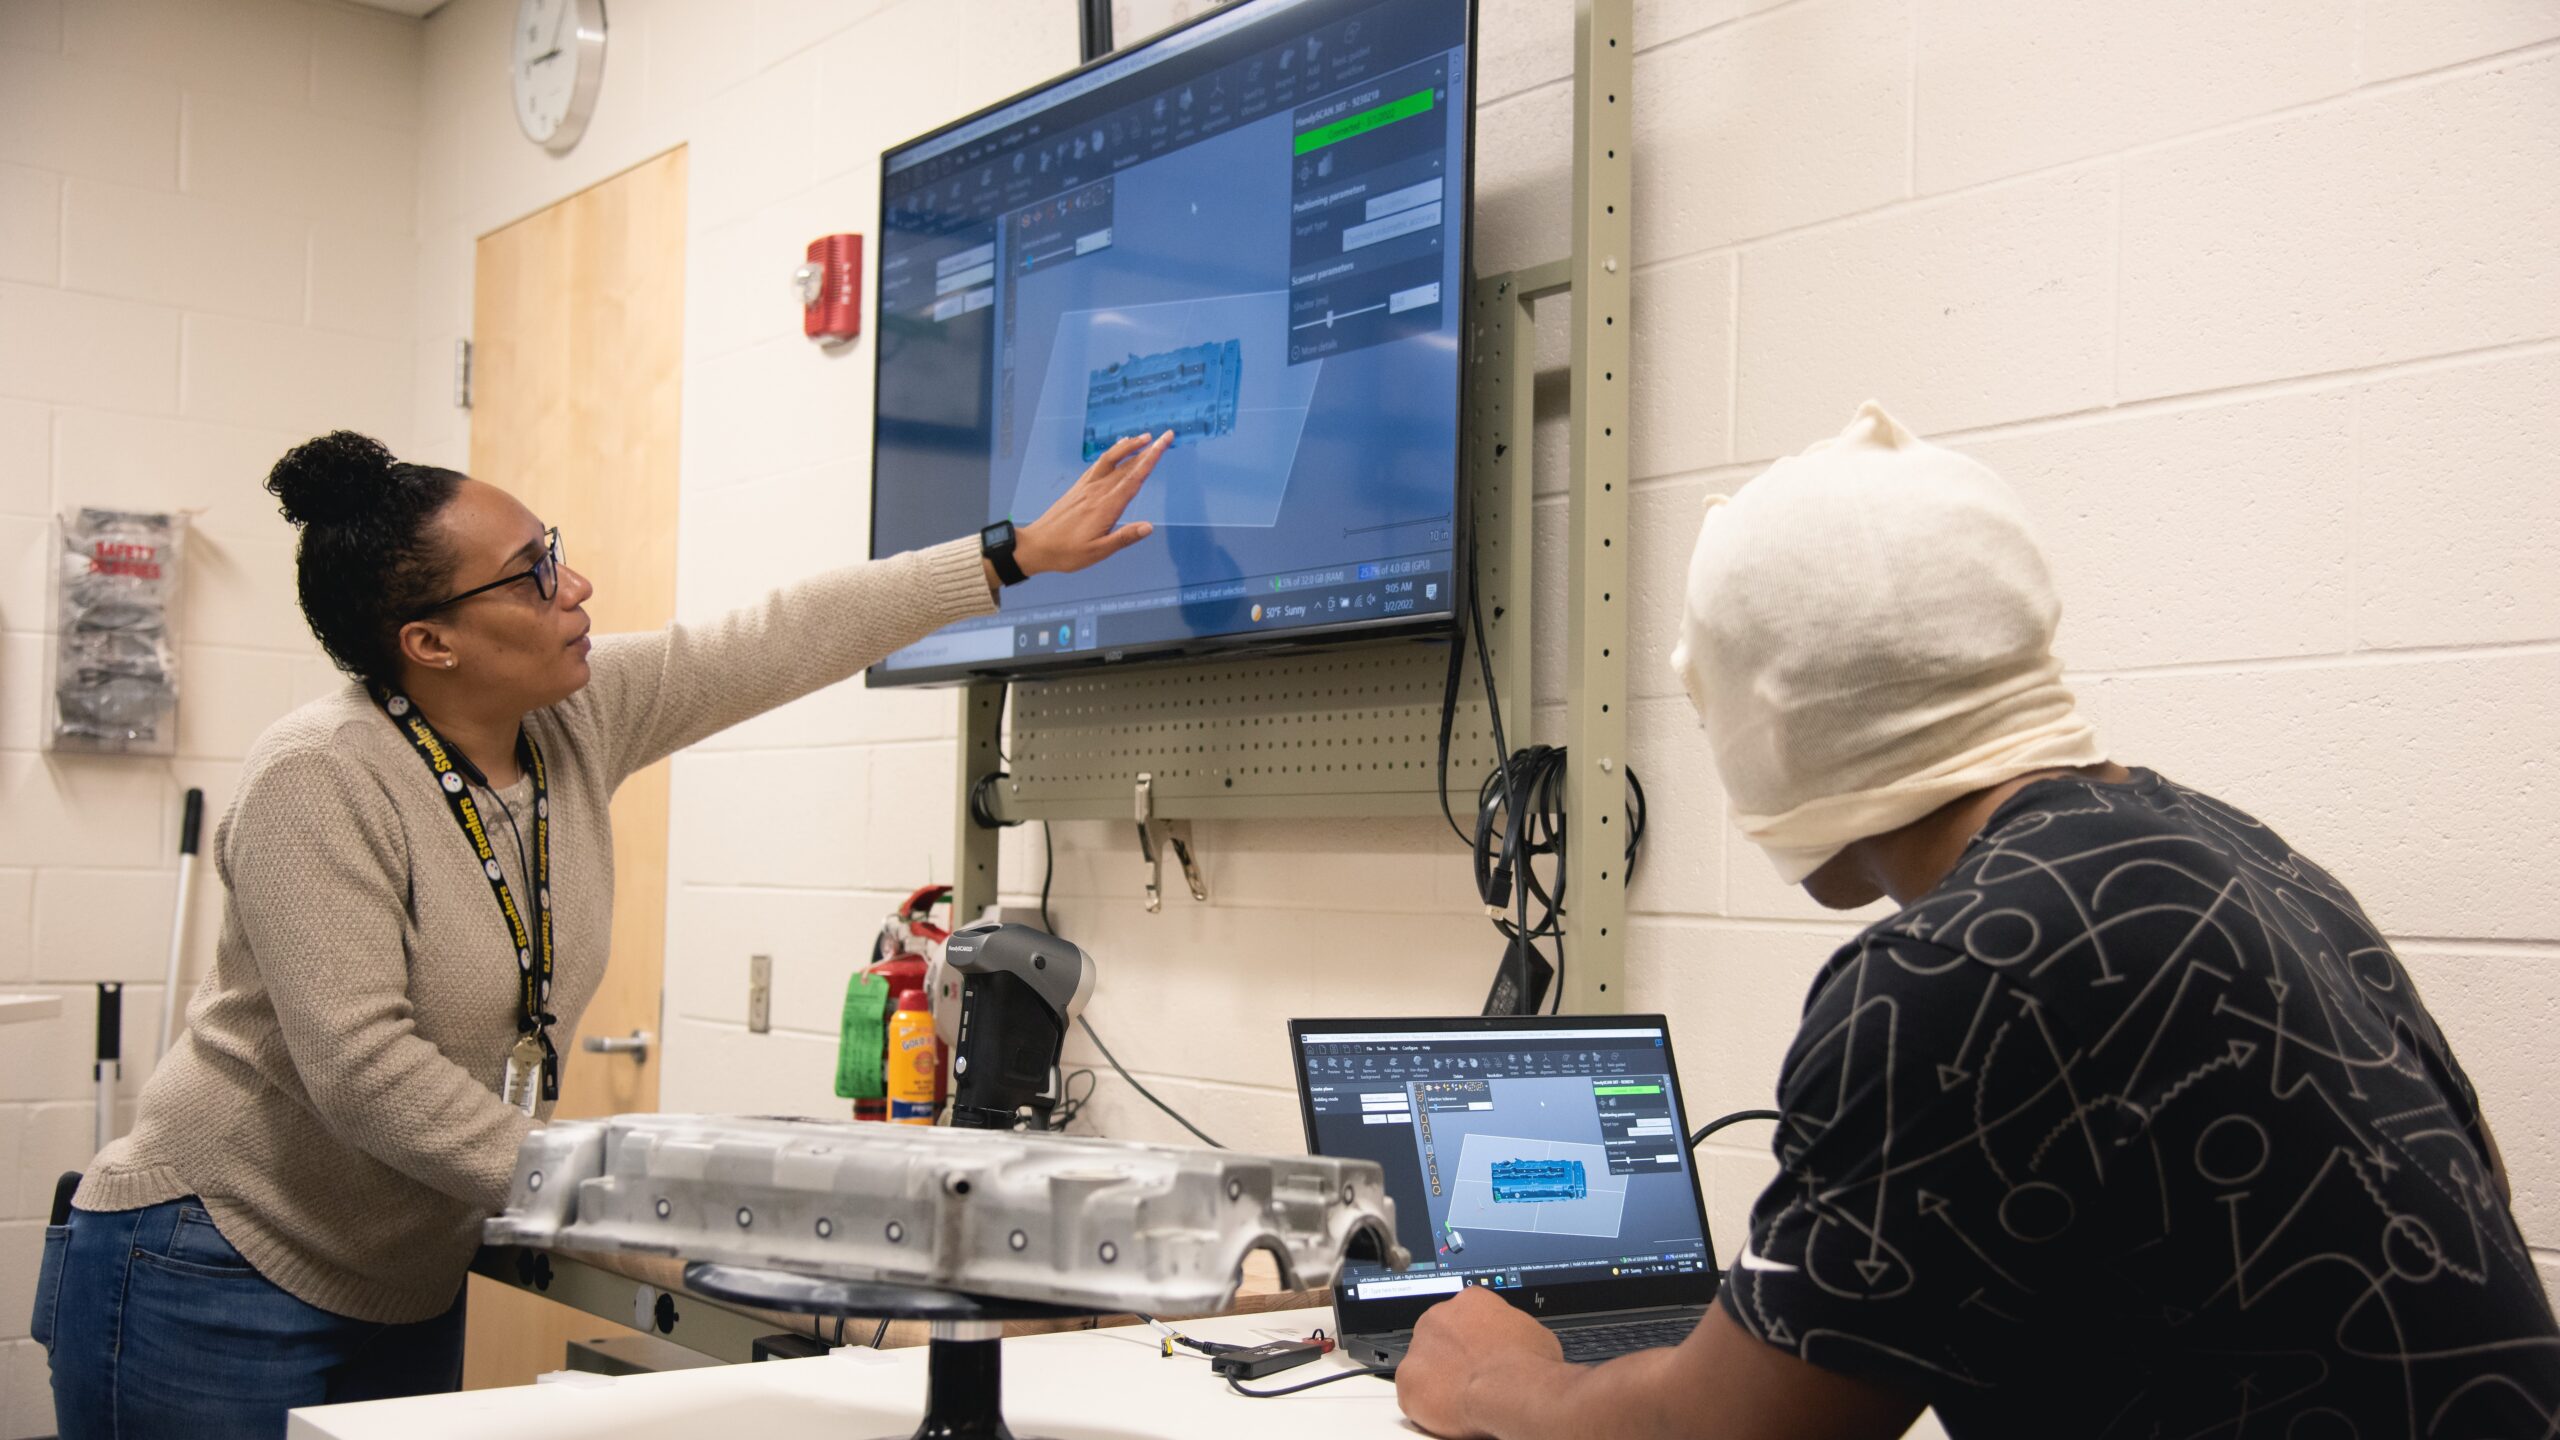 Instructor Natasha Diaz guides a student on how to use 3D scanner software in the Ray Bagley Innovation Lab at The Newport News Shipbuilding Apprentice School. (Photo by Ashley Cowan/HII)